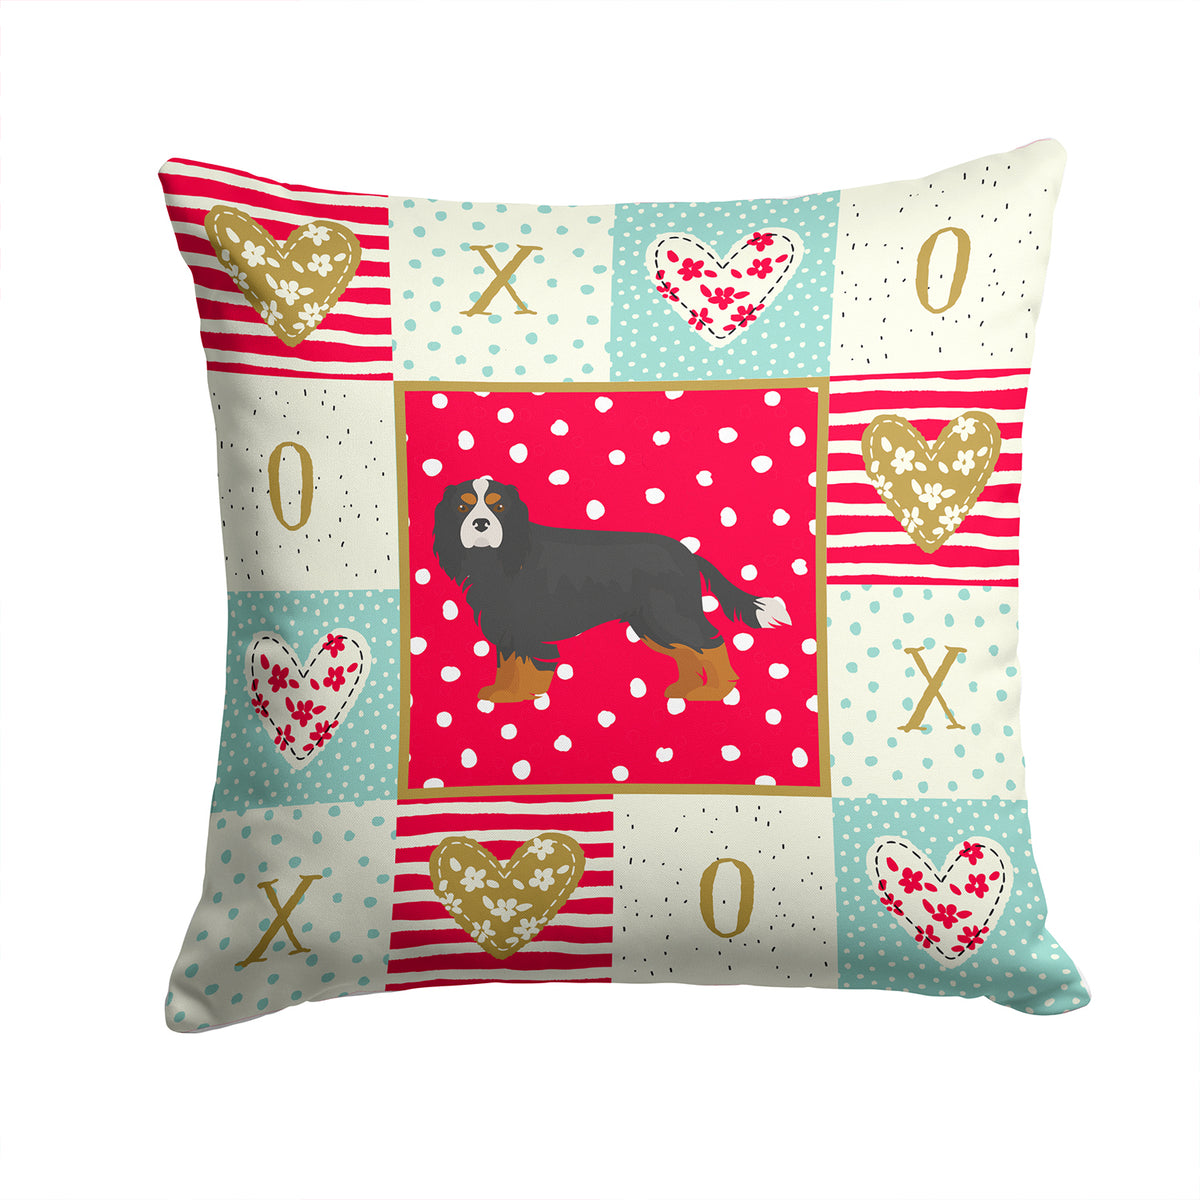 Cavalier King Charles Spaniel Love Fabric Decorative Pillow CK5819PW1414 - the-store.com